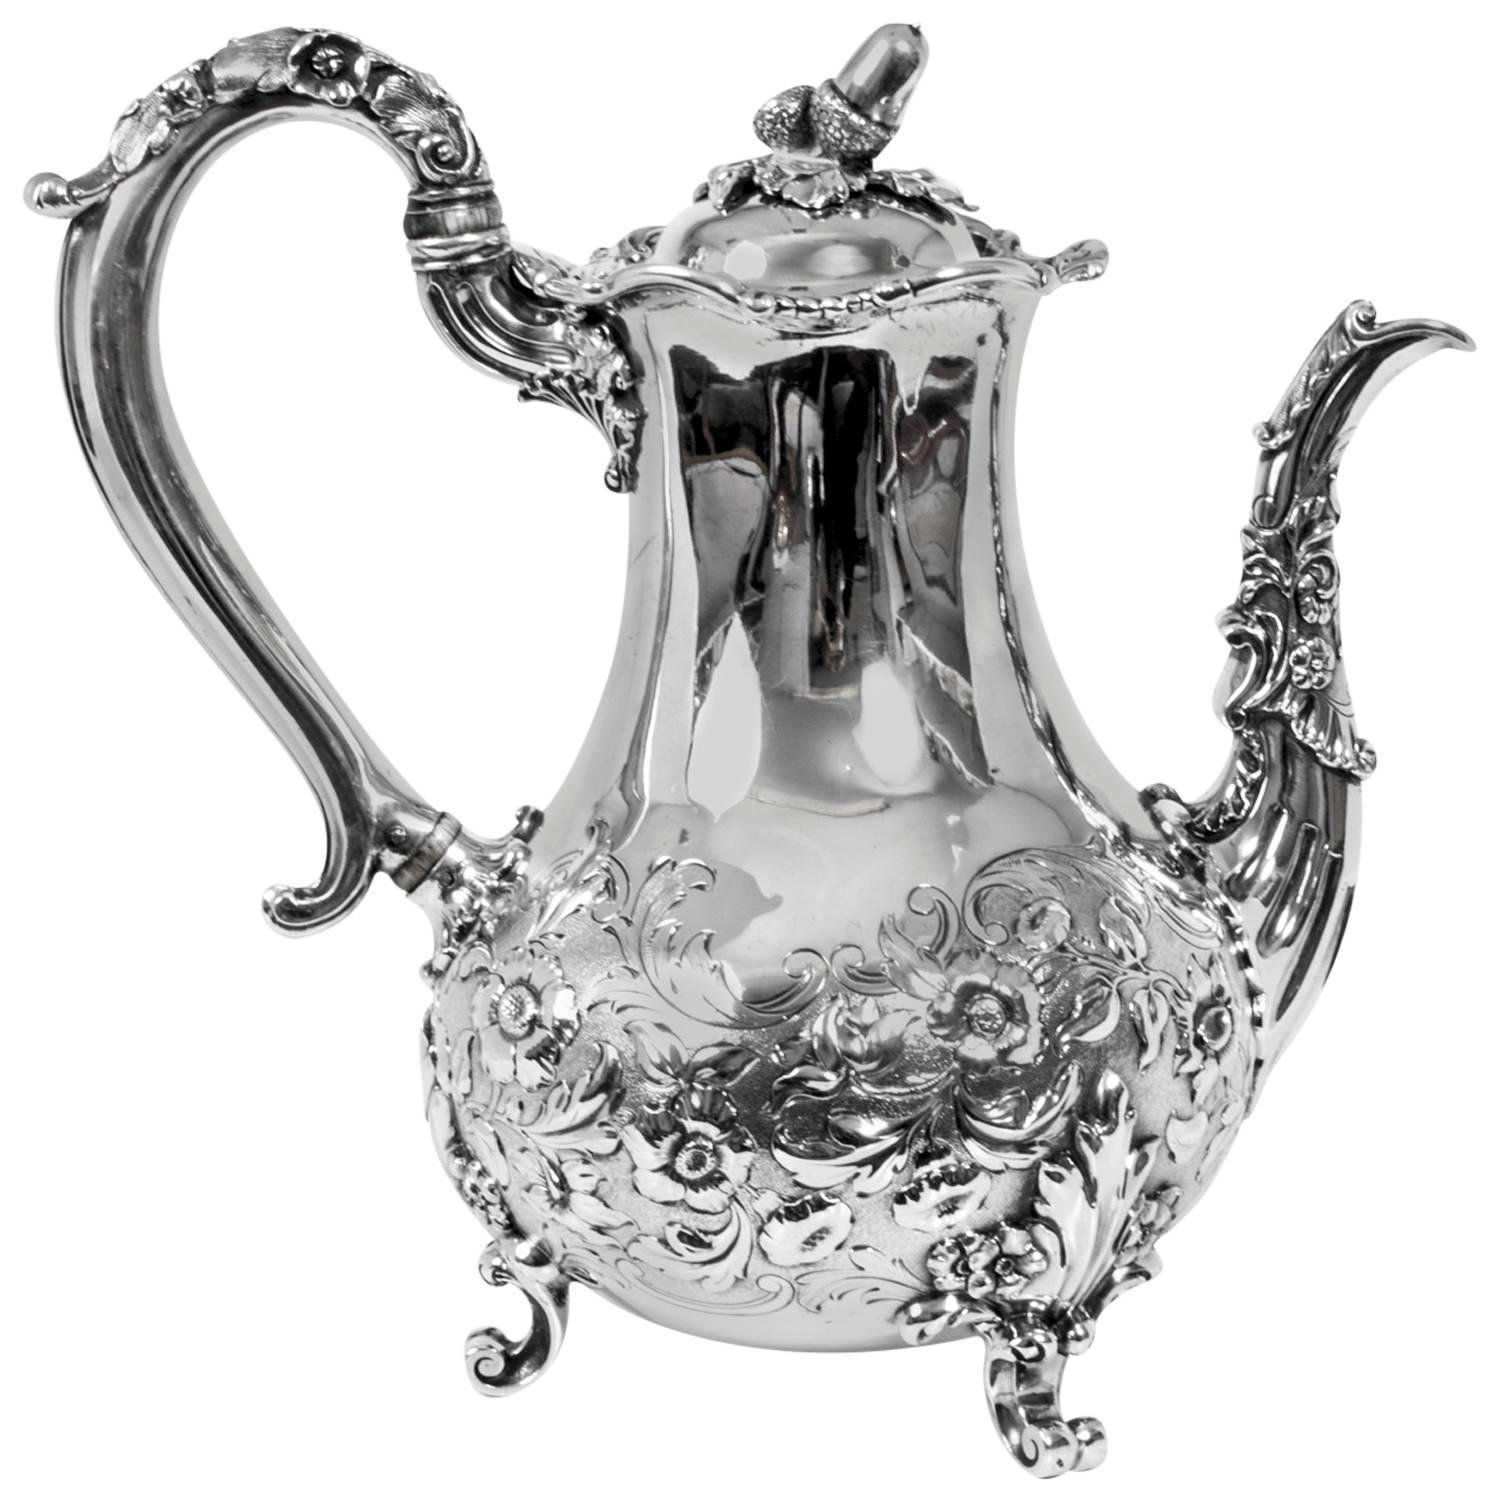 Antique Paul Storr Sterling Silver Coffee Pot, 1833